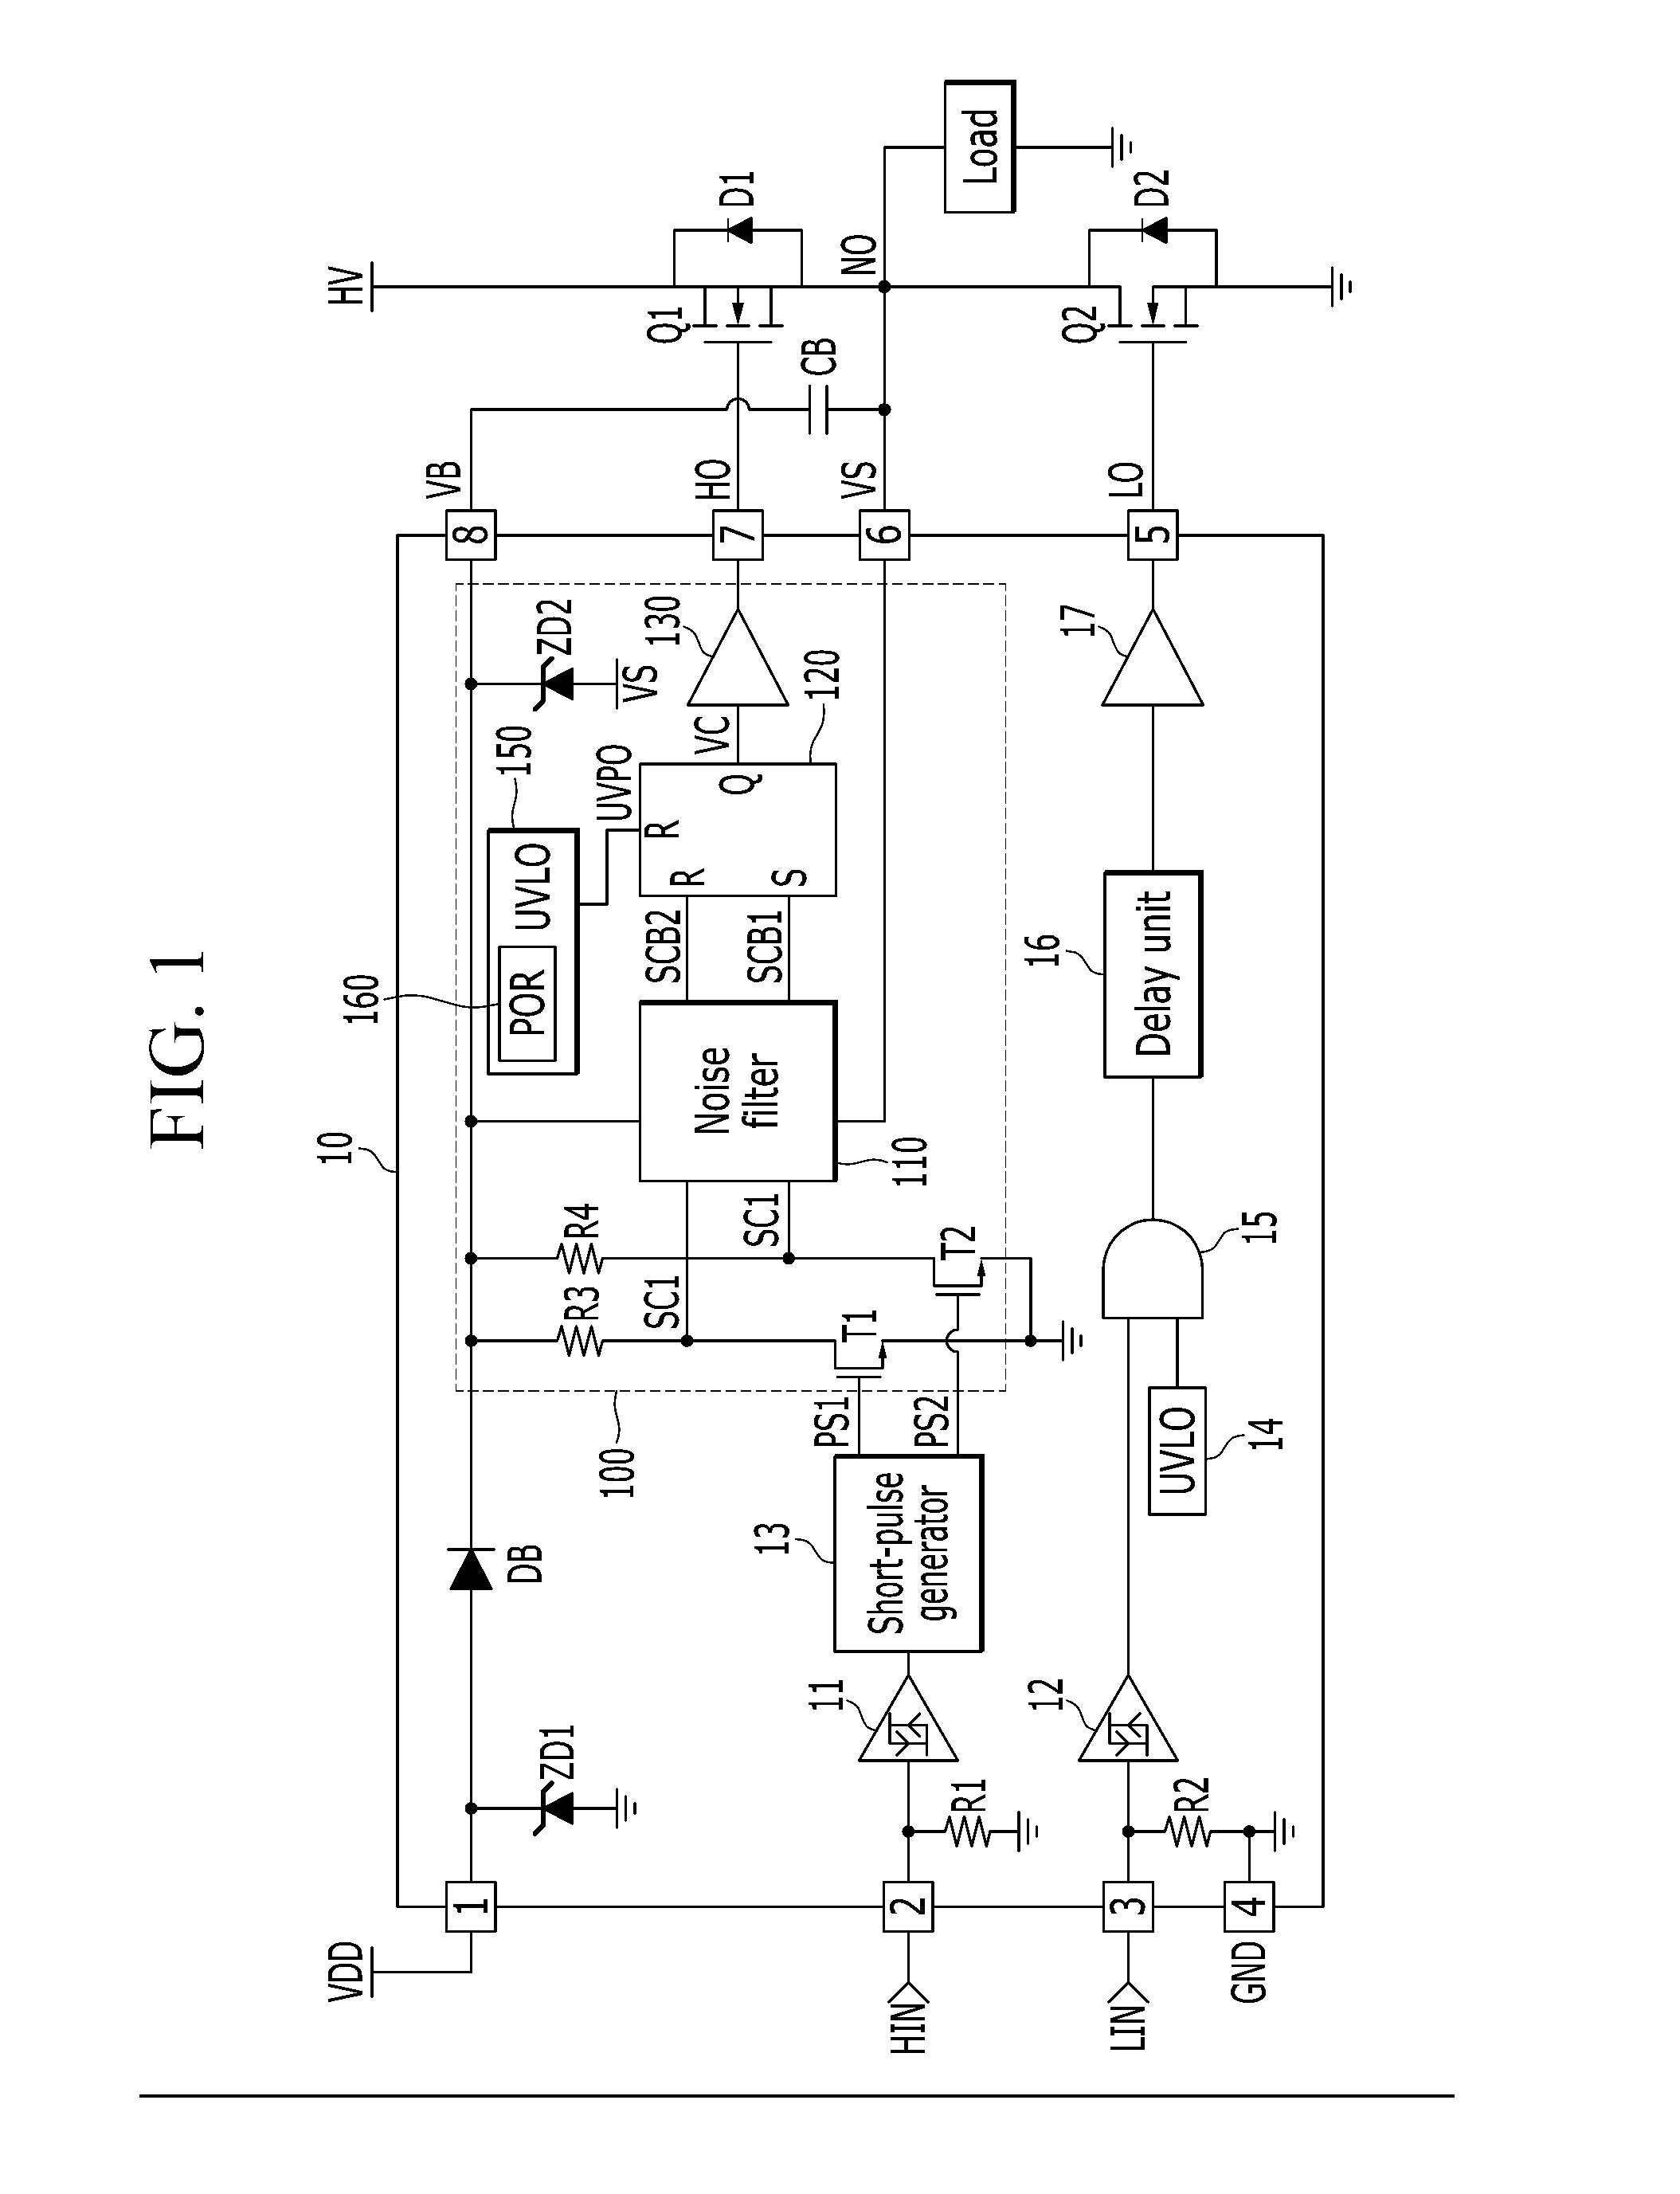 Power-on reset circuit and under-voltage lockout circuit comprising the same